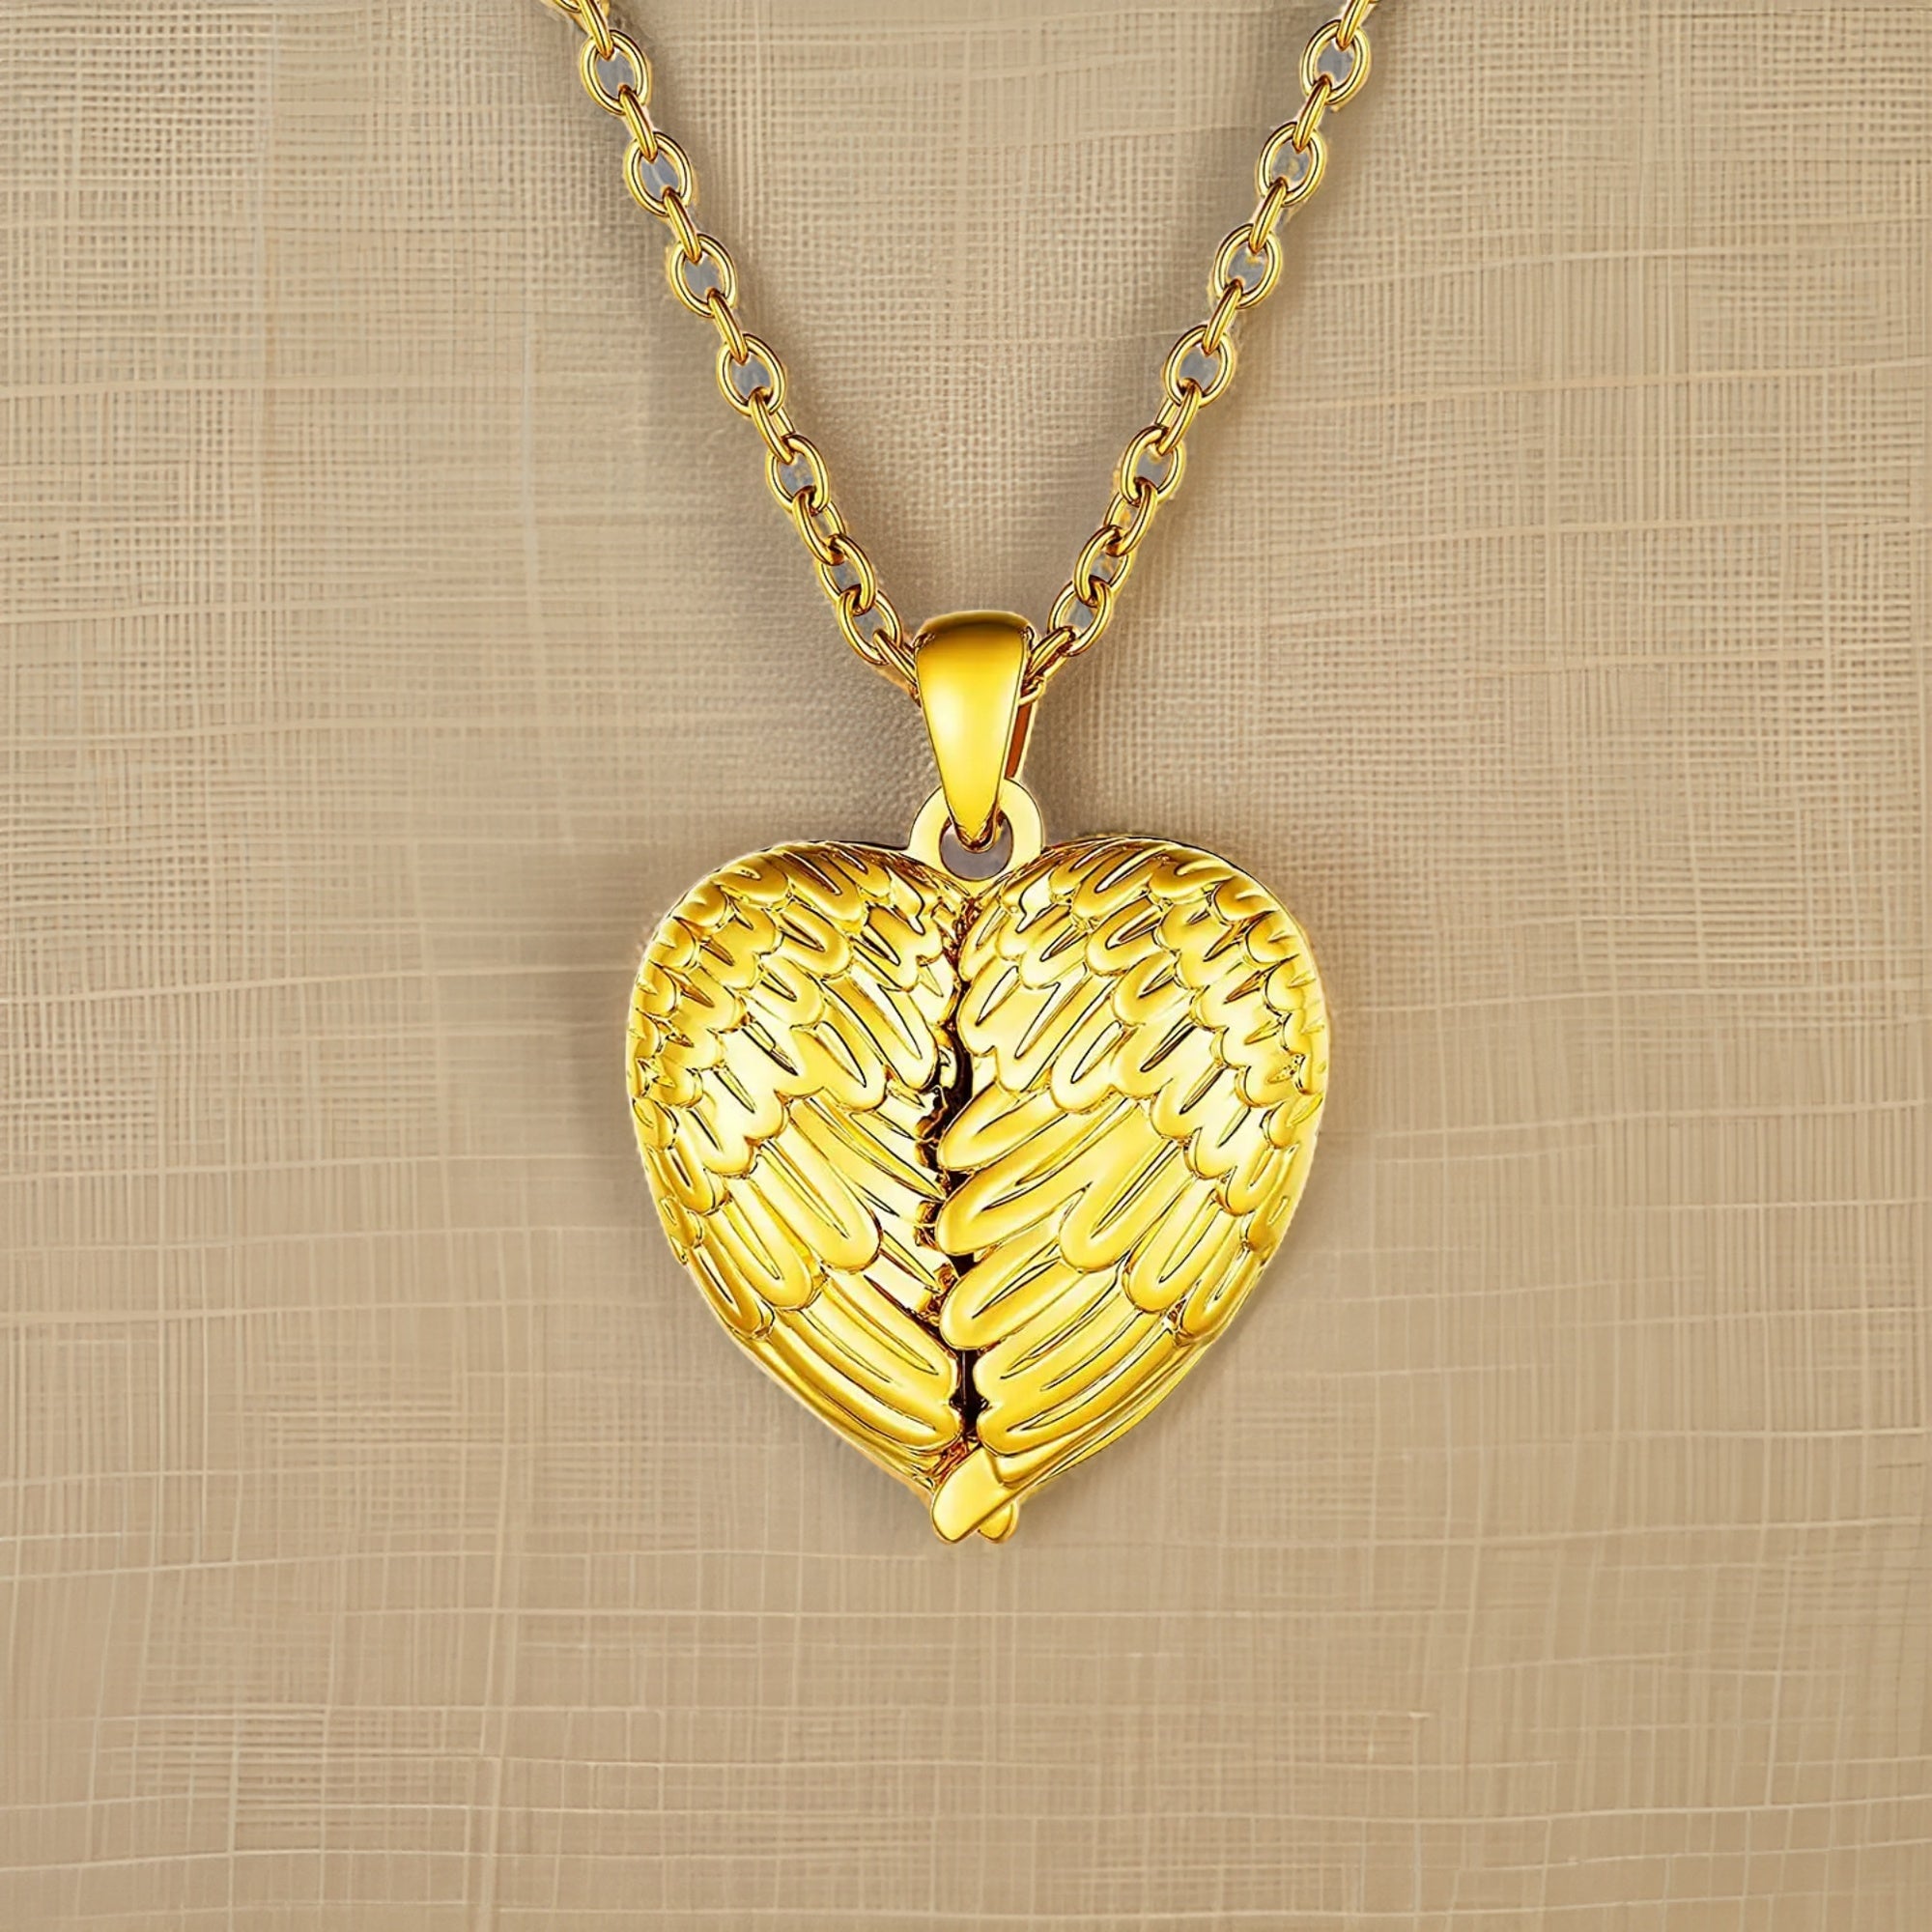 Goldchic Angel Wing Locket Necklace Personalized Picture for Women Heart Shaped Charm Memorial Jewelry Gifts